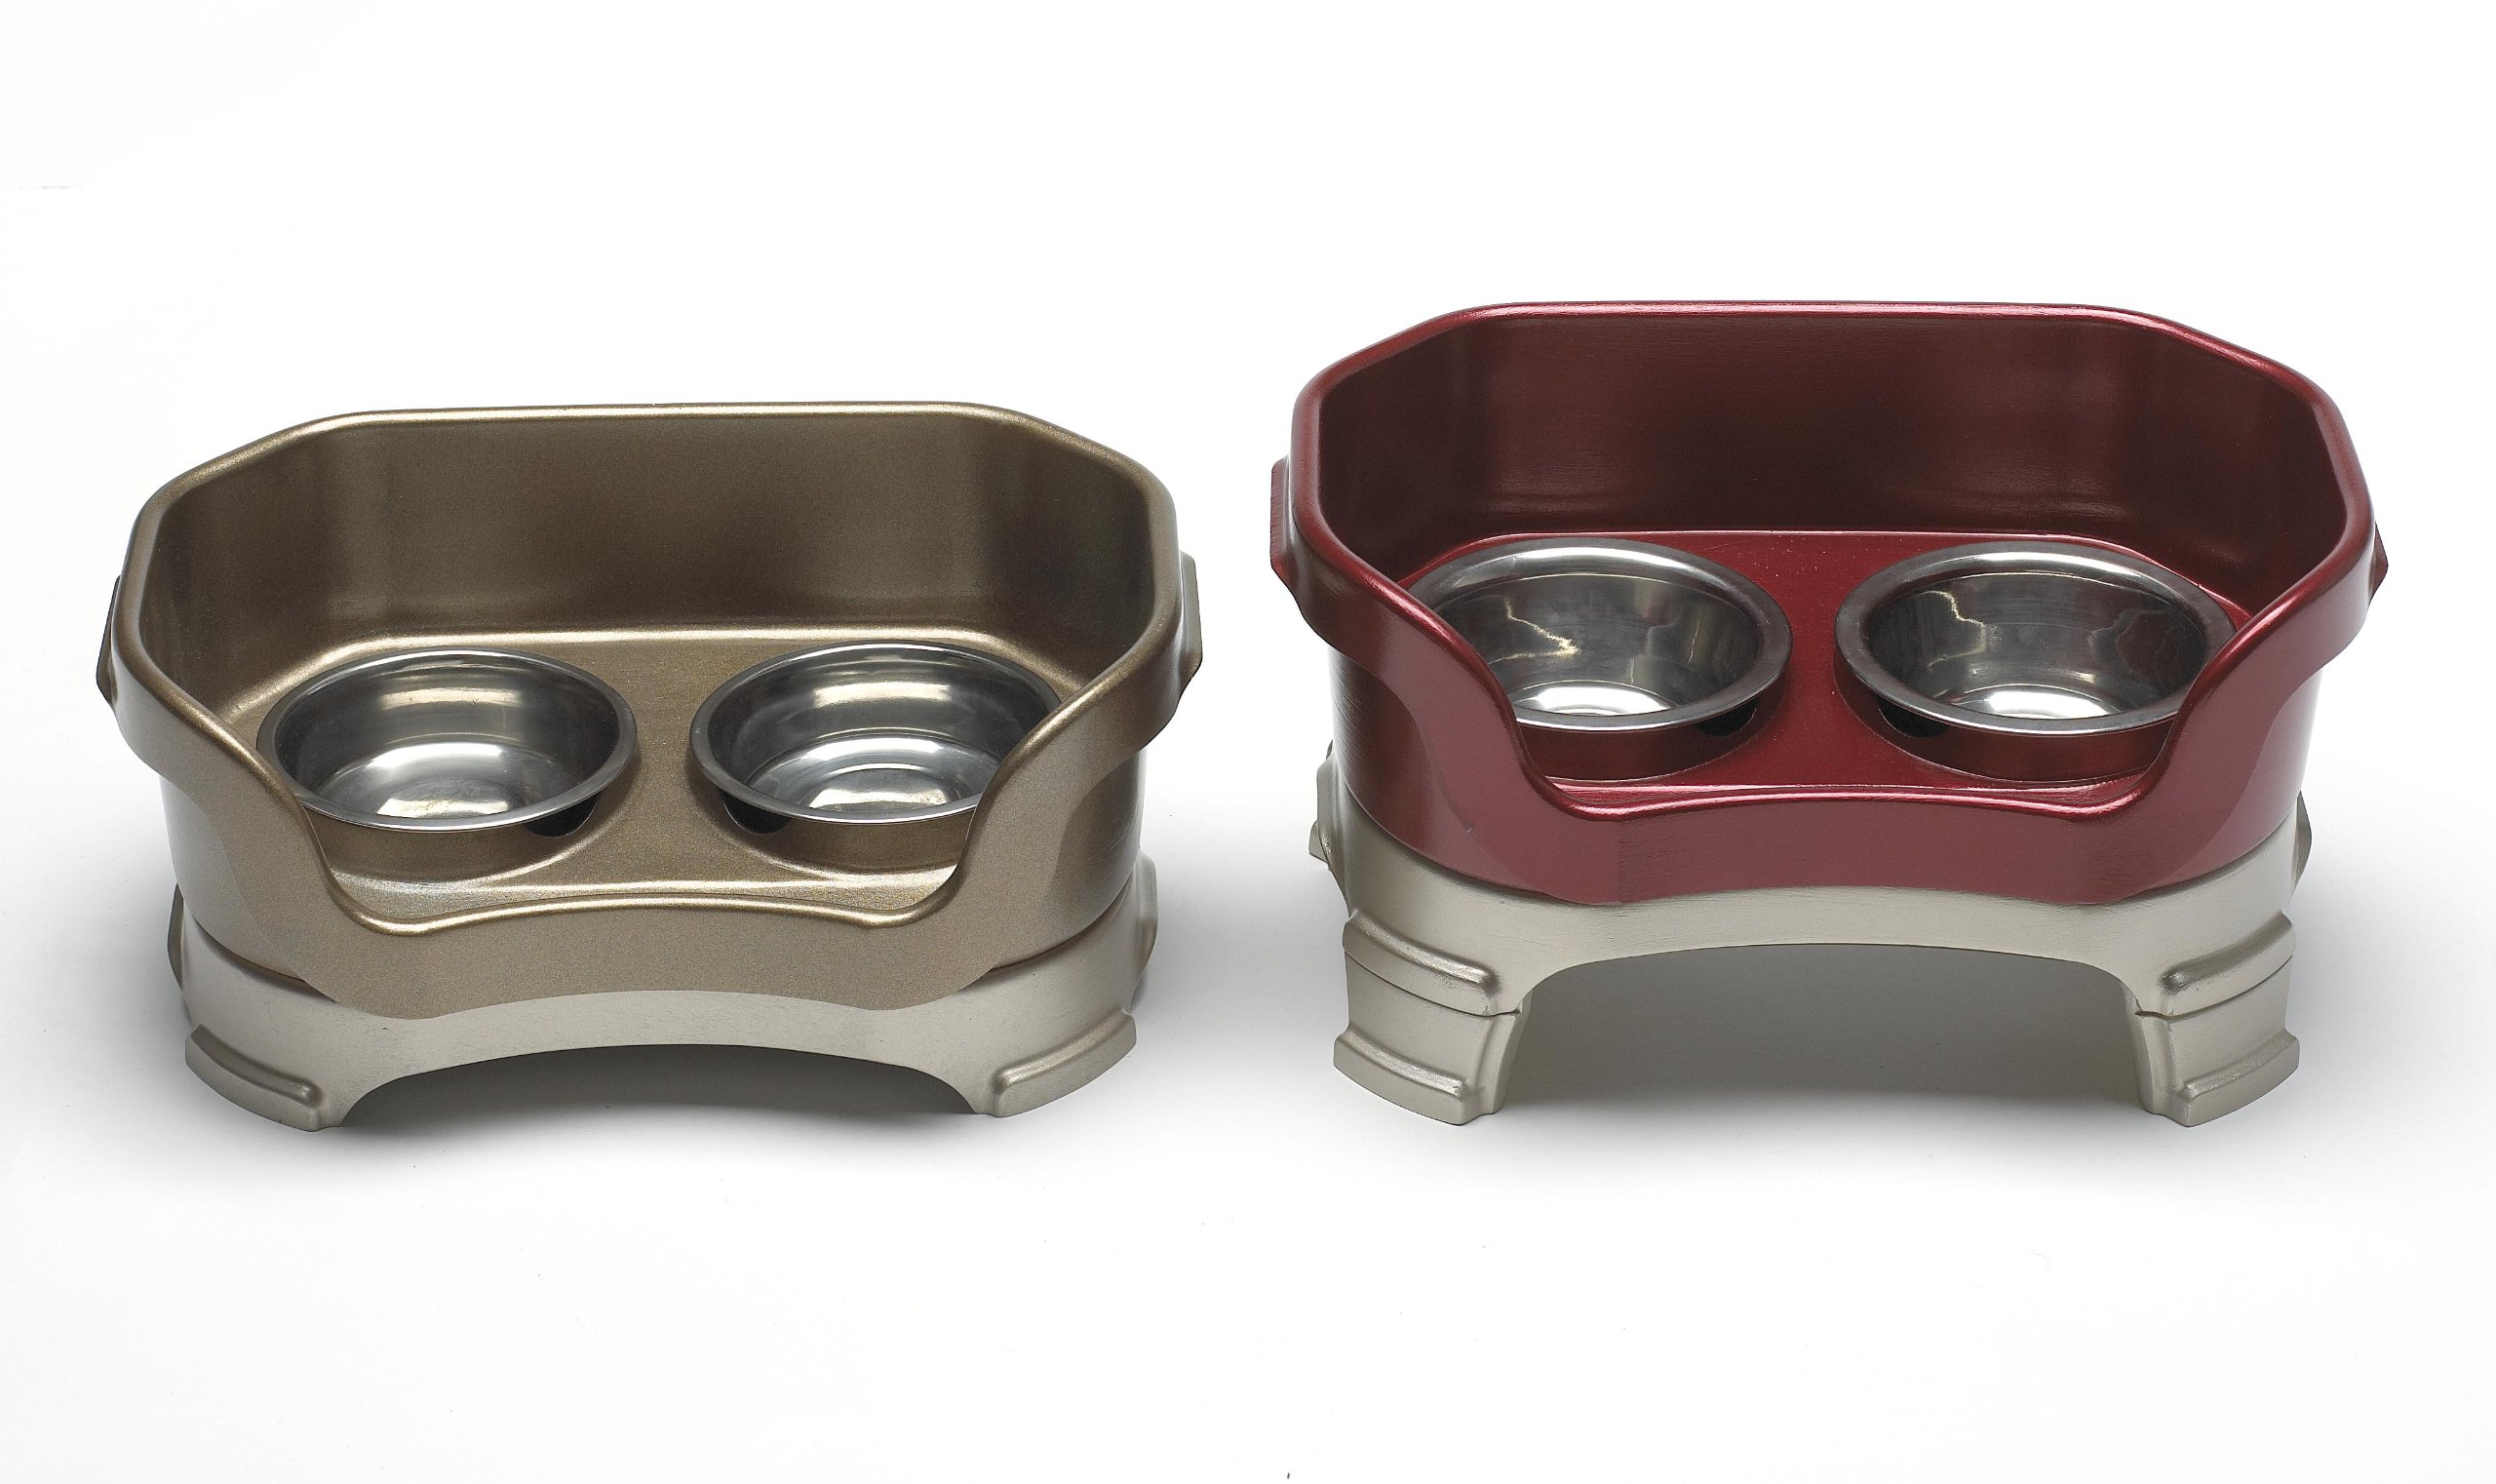 Neater Feeder Deluxe Medium Dog (Cranberry) - The Mess Proof Elevated Bowls No Slip Non Tip Double Diner Stainless Steel Food Dish with Stand